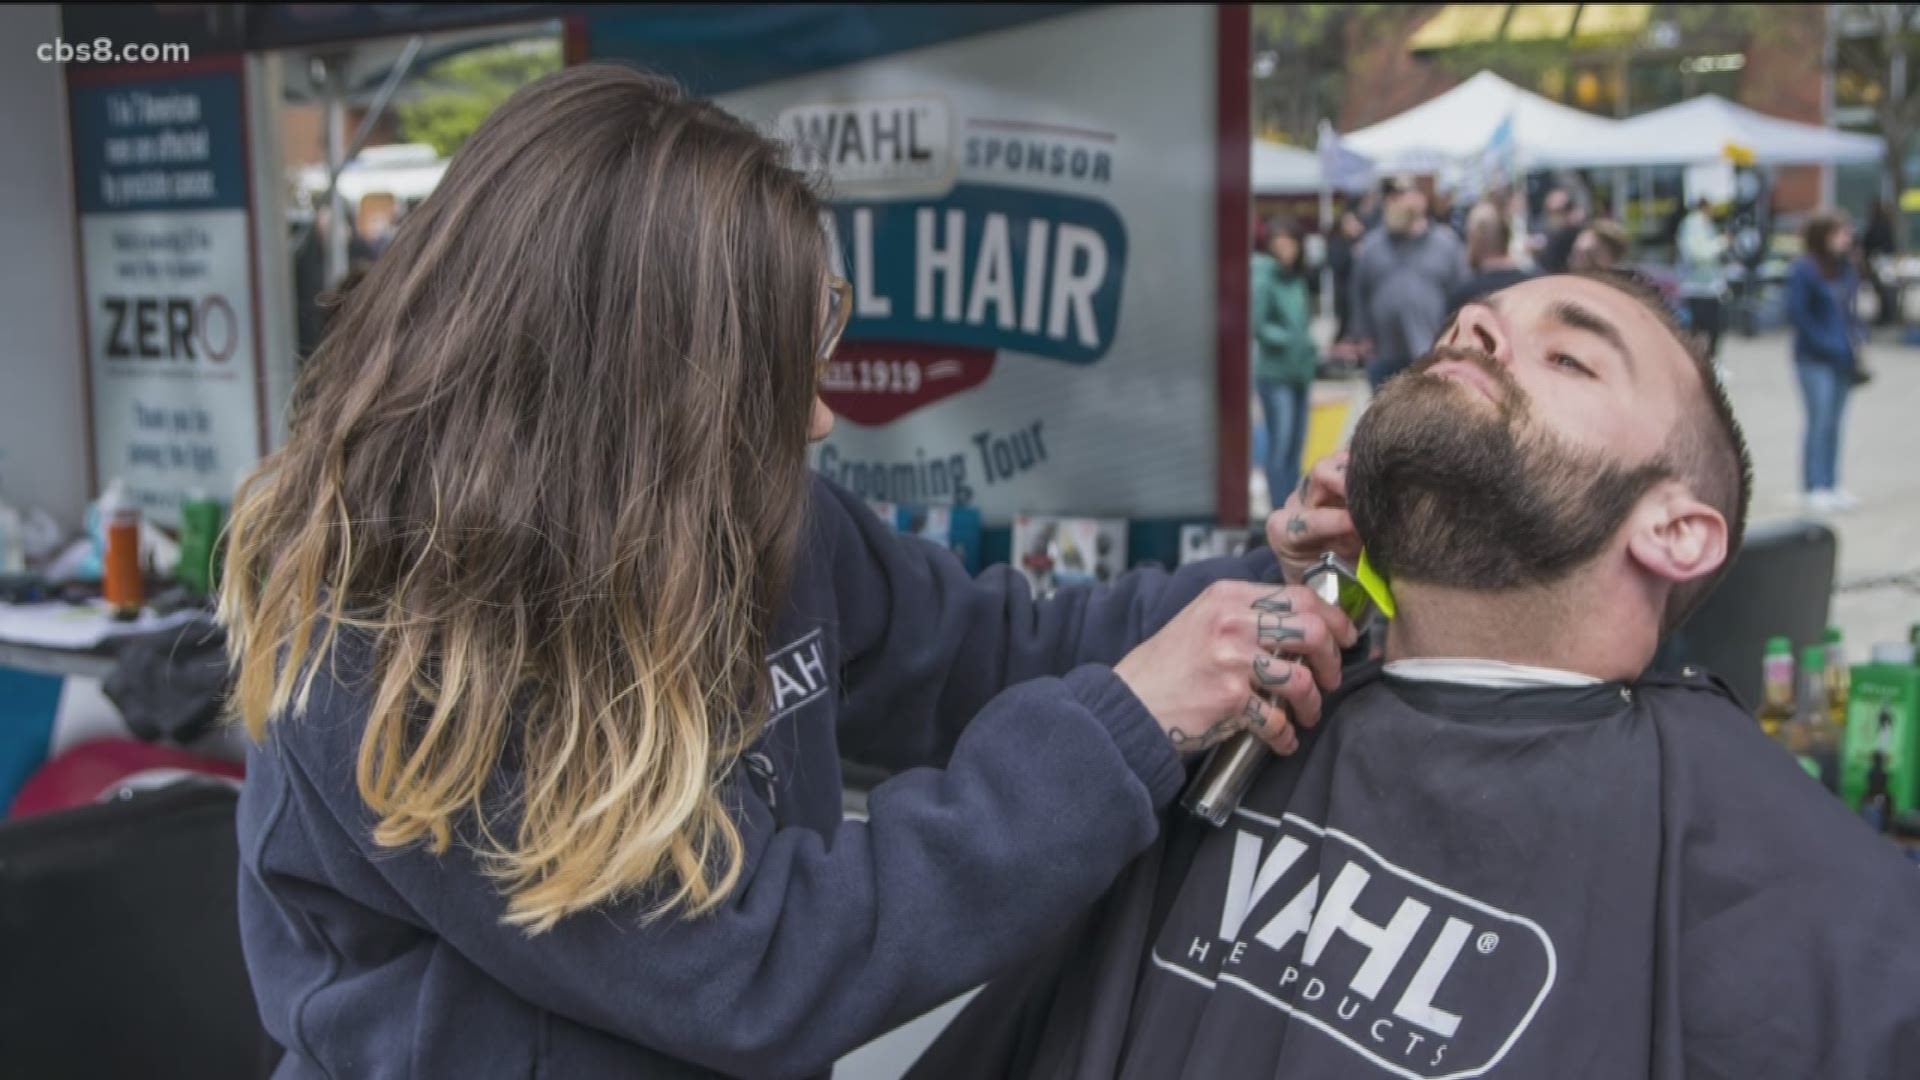 Get a free beard or mustache trim and you may be chosen to compete in the Wahl Man of the Year contest.